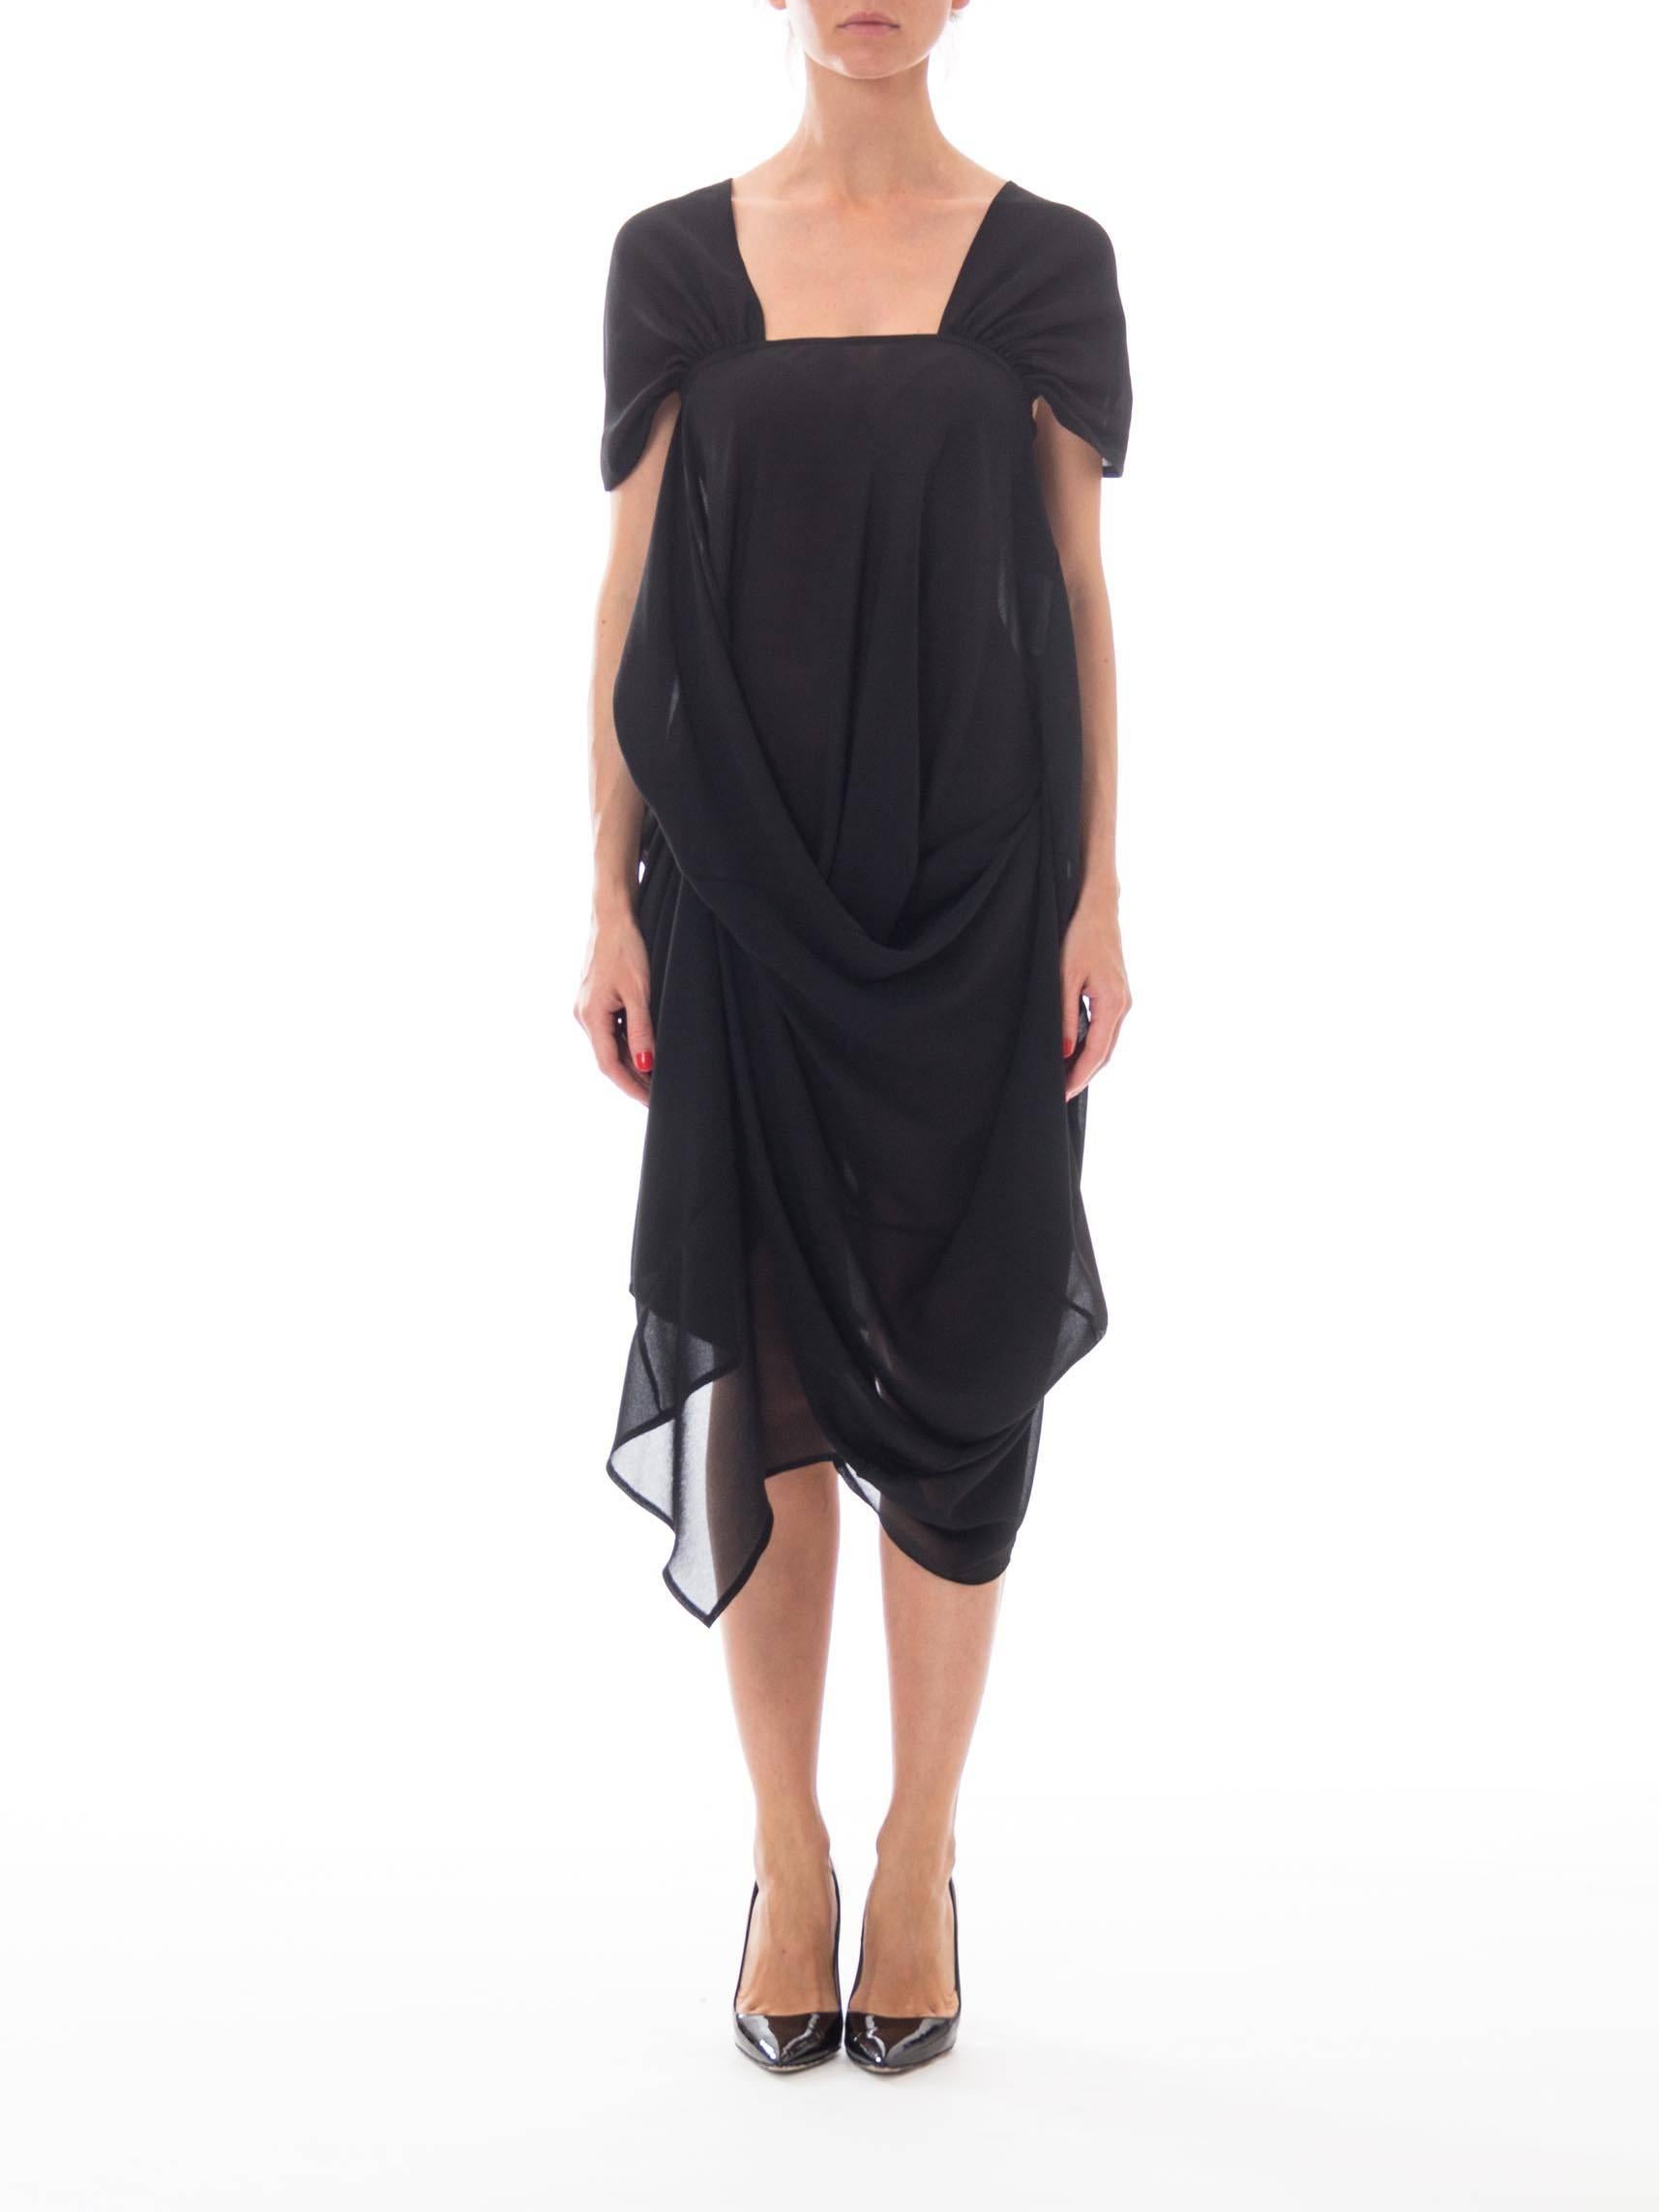 This is a stunning avant-garde dress by Junya Watanabe for Comme des Garçons. Marrying the easy styling of an LBD with the elegance of a classic evening gown, it is beautifully designed and skillfully made. The body of the dress is a shift of black